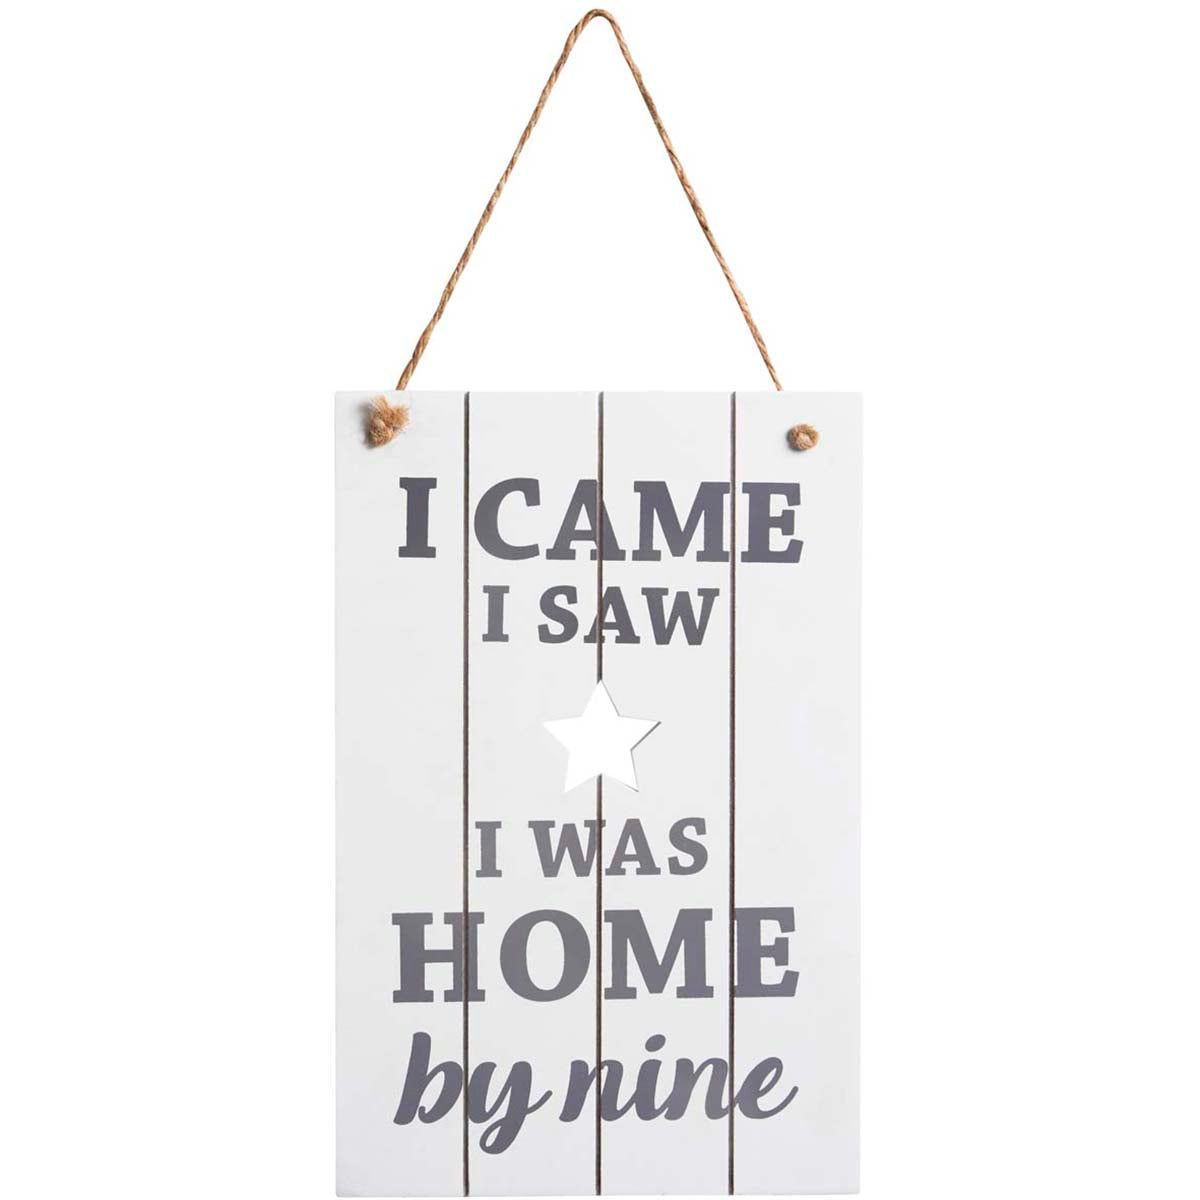 I Came, I Saw, I was Home by nine hanging sign